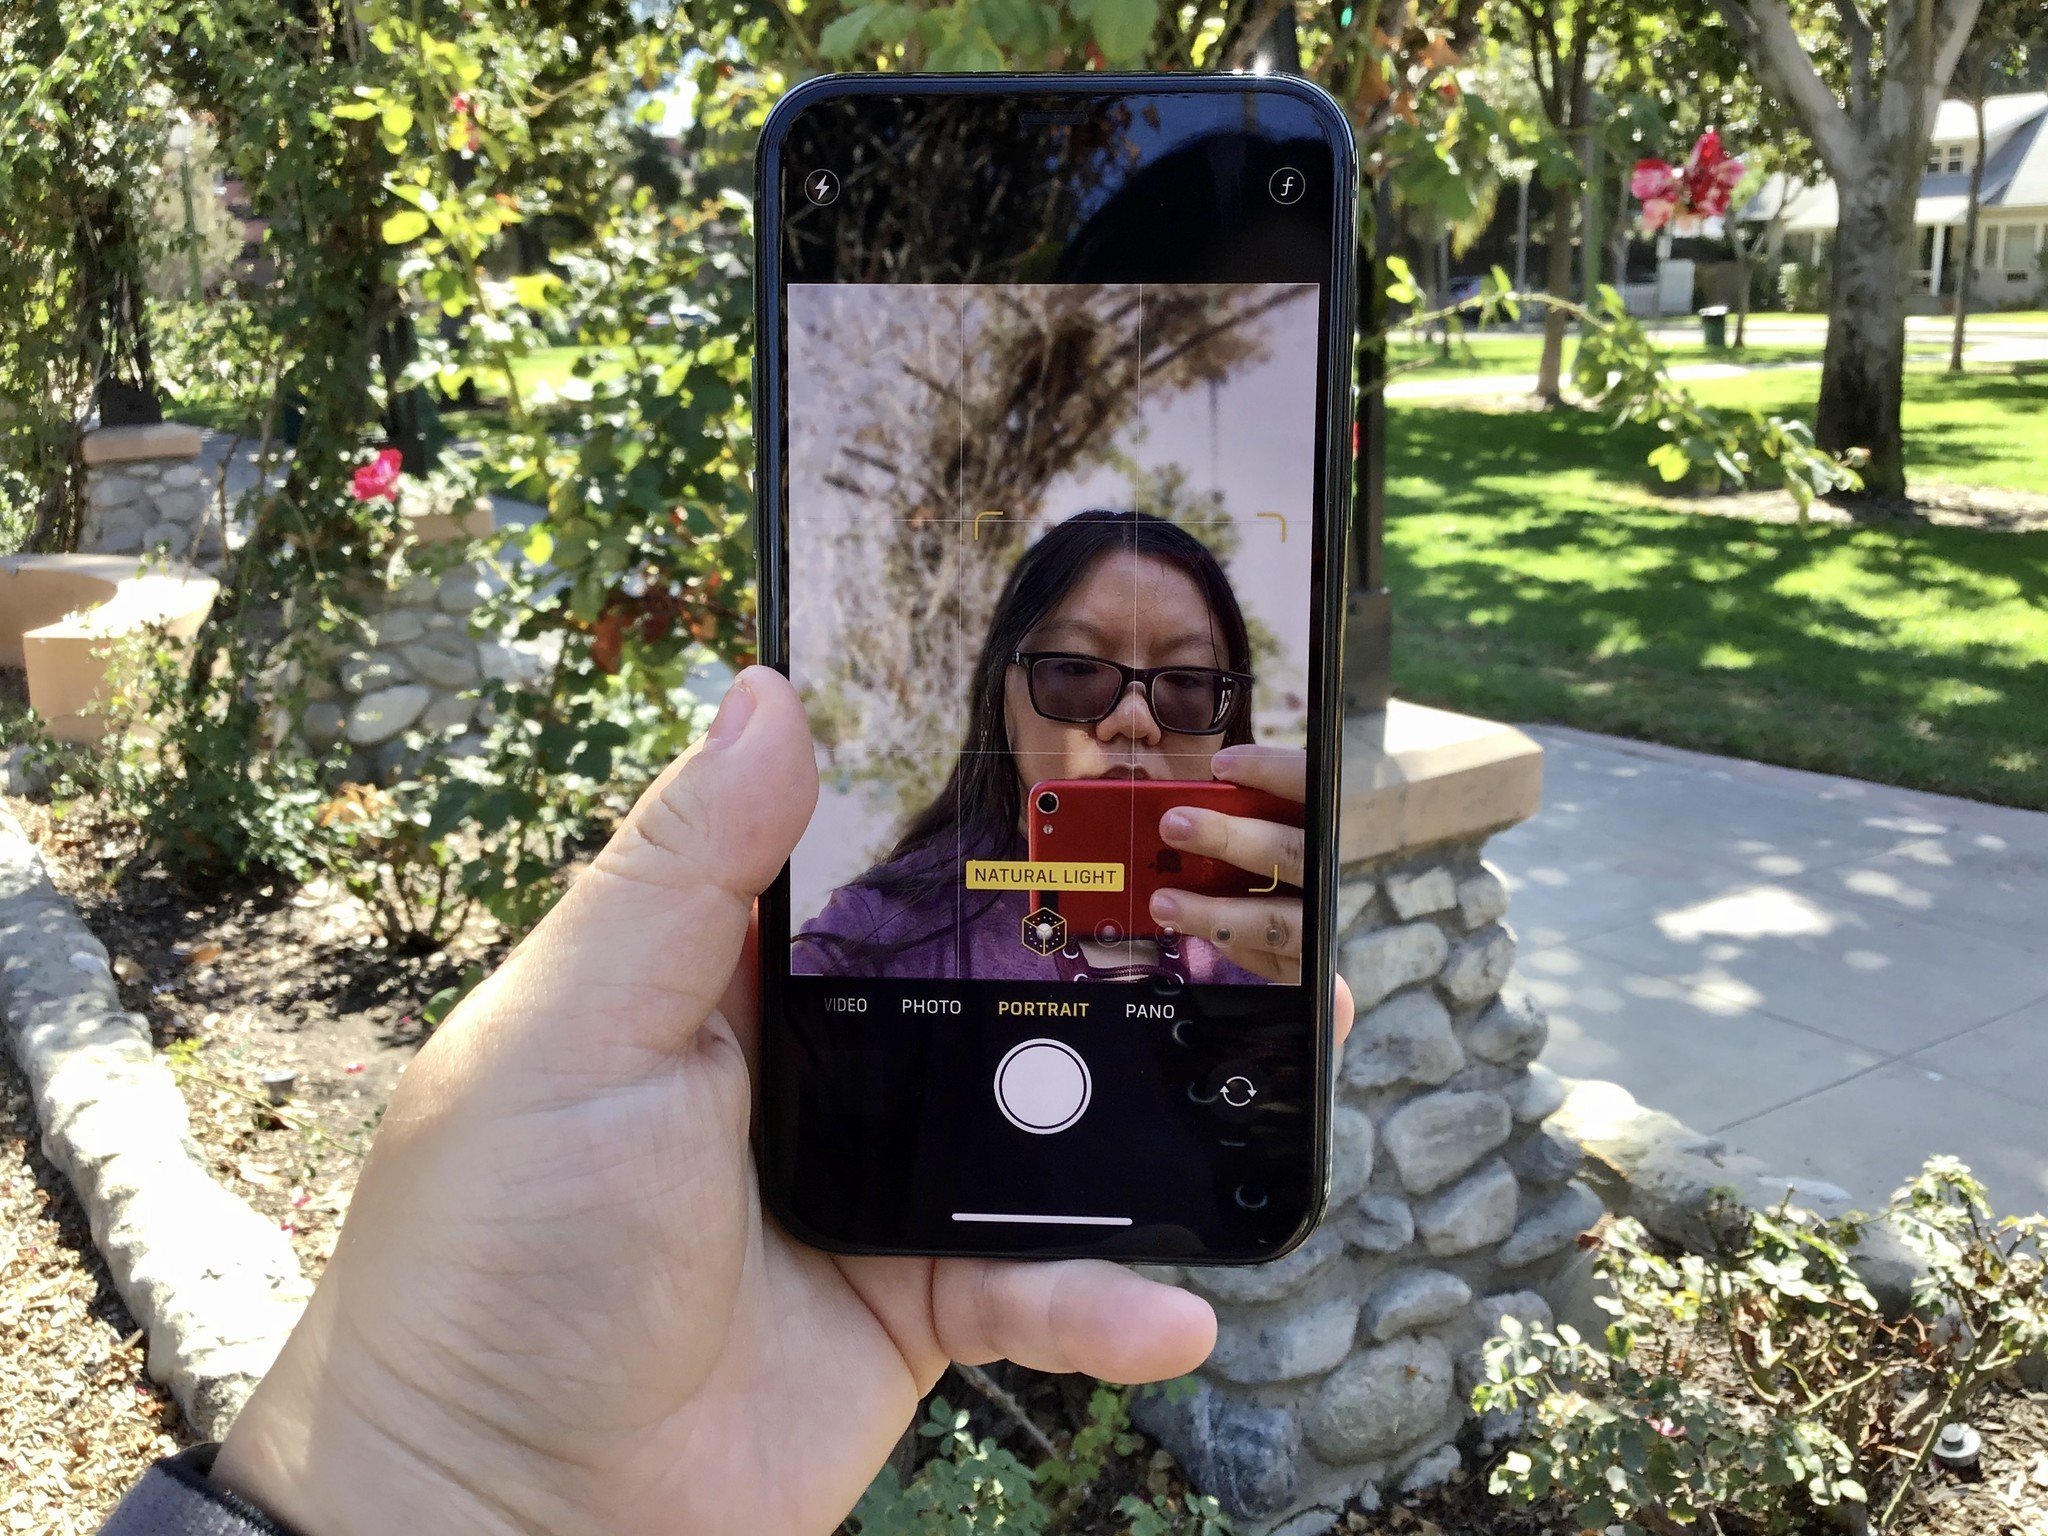 Christine takes a portrait selfie with iPhone 11 Pro